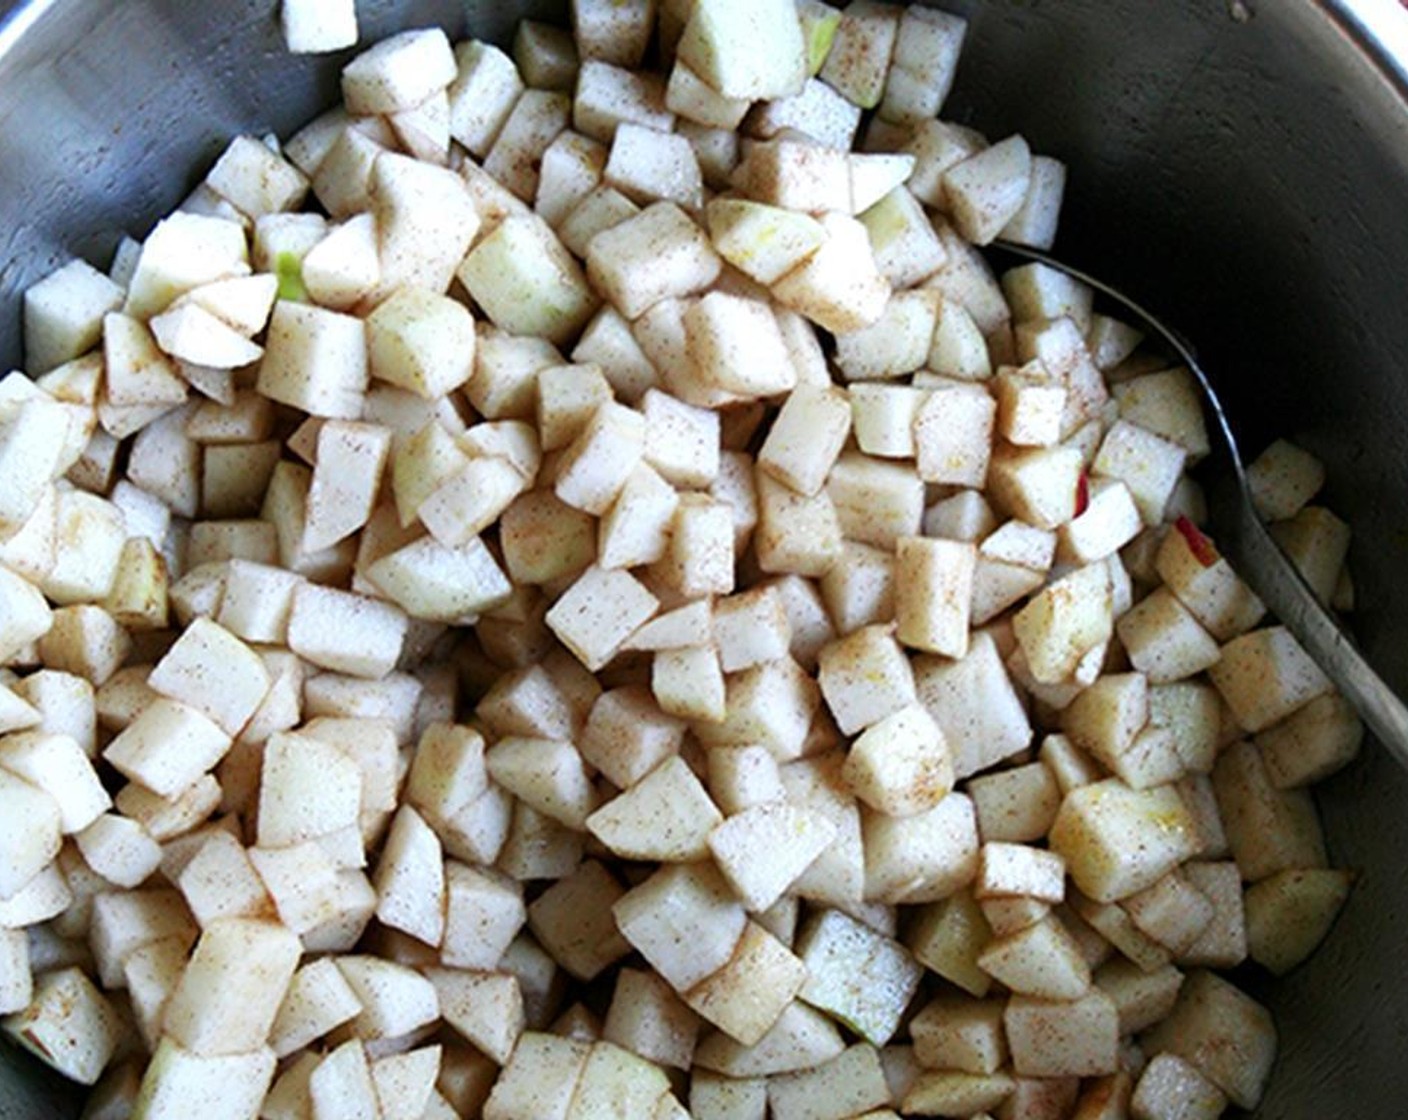 step 6 Peel the Apples (10) and cut into large chunks. Place in a large bowl and toss with Granulated Sugar (3/4 cup), Ground Cinnamon (1 tsp), Whole Cloves (to taste), the zest of Lemon (1), juice from the Lemon (1), and the Instant Tapioca (2 Tbsp). Set aside.